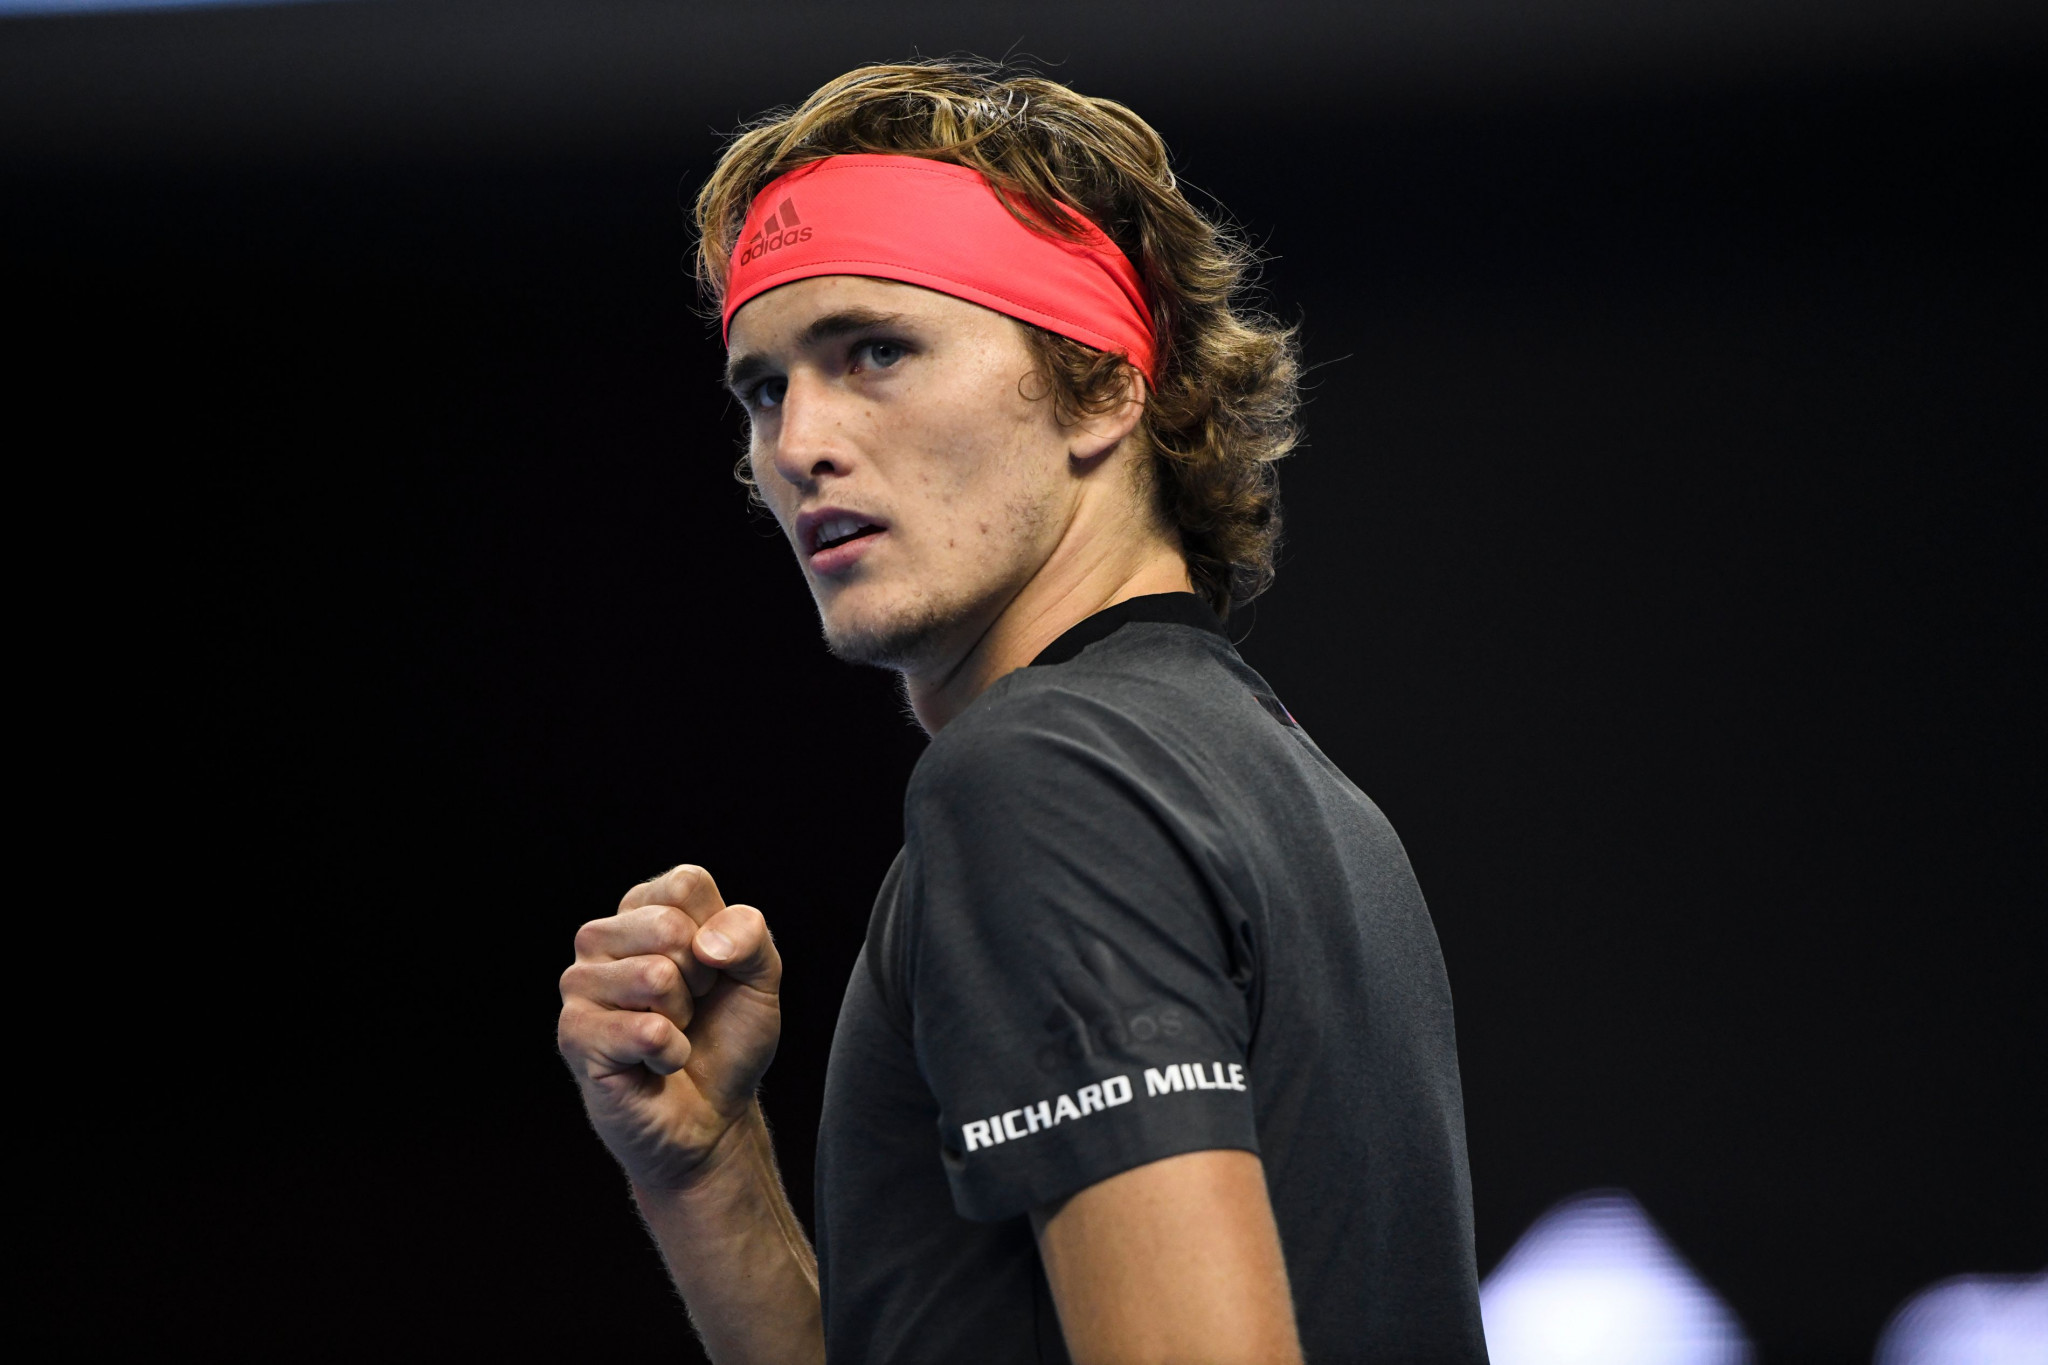 Second seed Alexander Zverev of Germany eased past his Spanish opponent Roberto Bautista Agut to advance to the second round of the Beijing Open at the National Tennis Center ©Getty Images